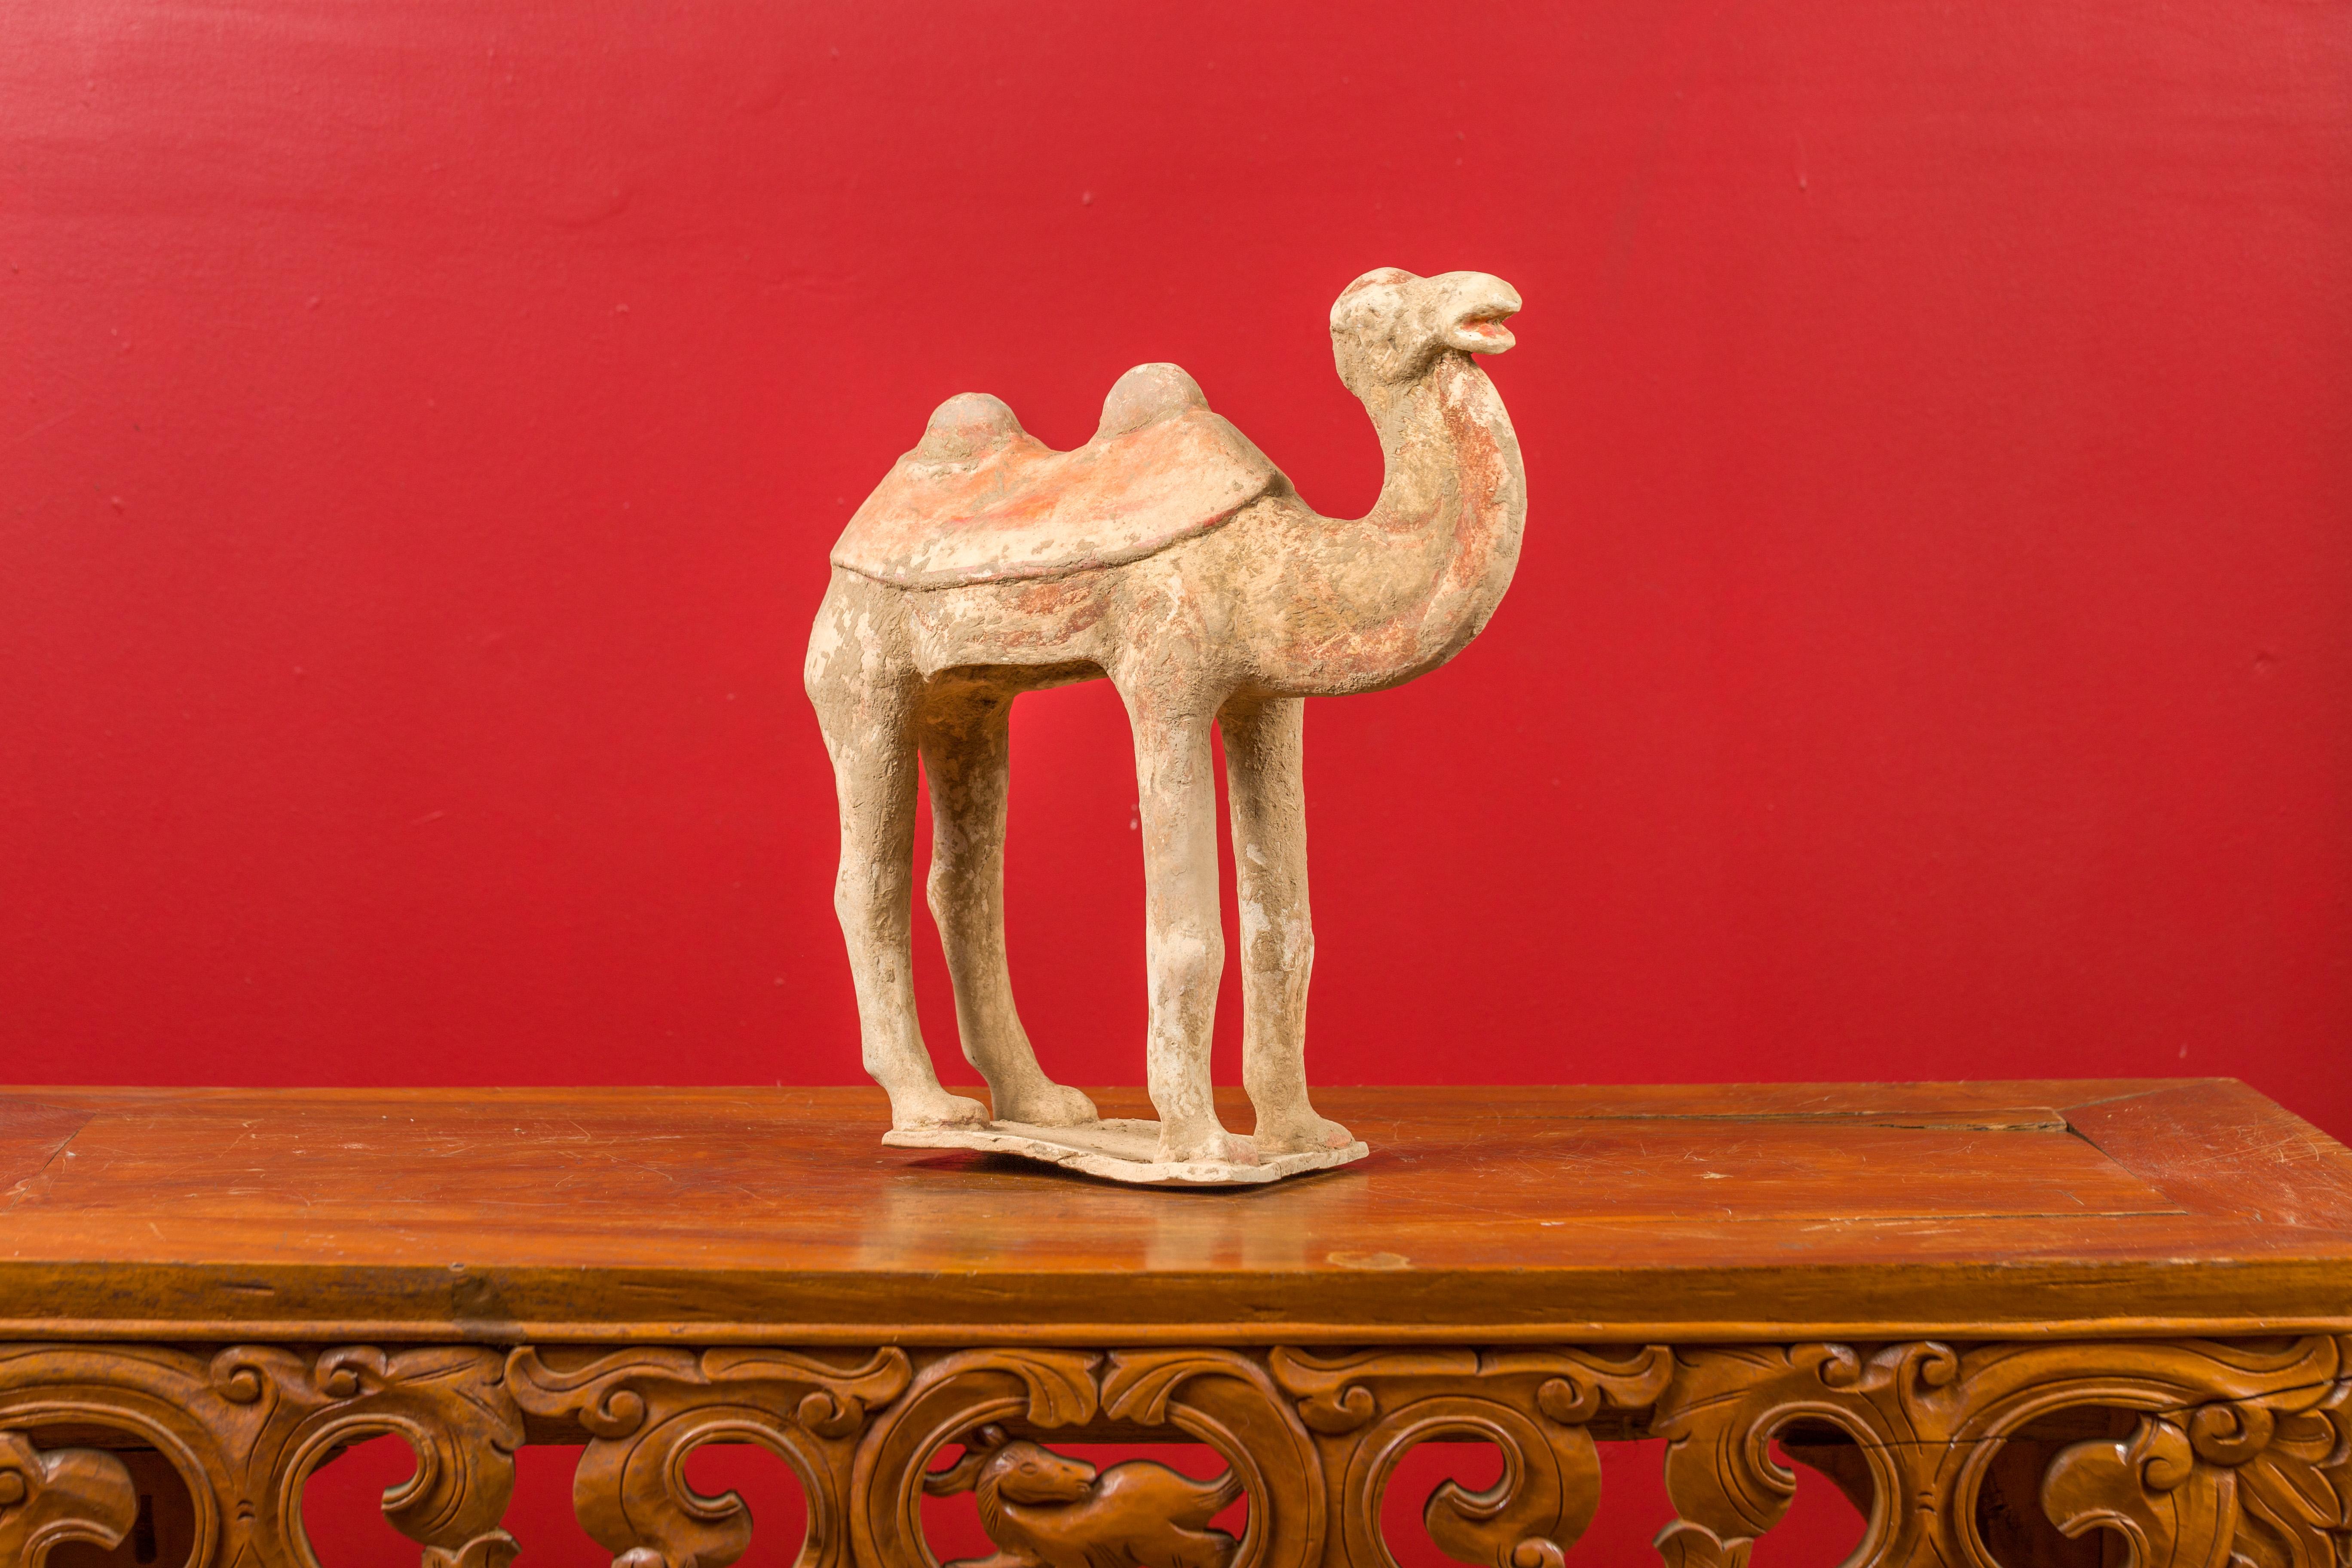 18th Century and Earlier Chinese Han Dynasty 202 BC-200 AD Mingqi Terracotta Camel with Original Paint